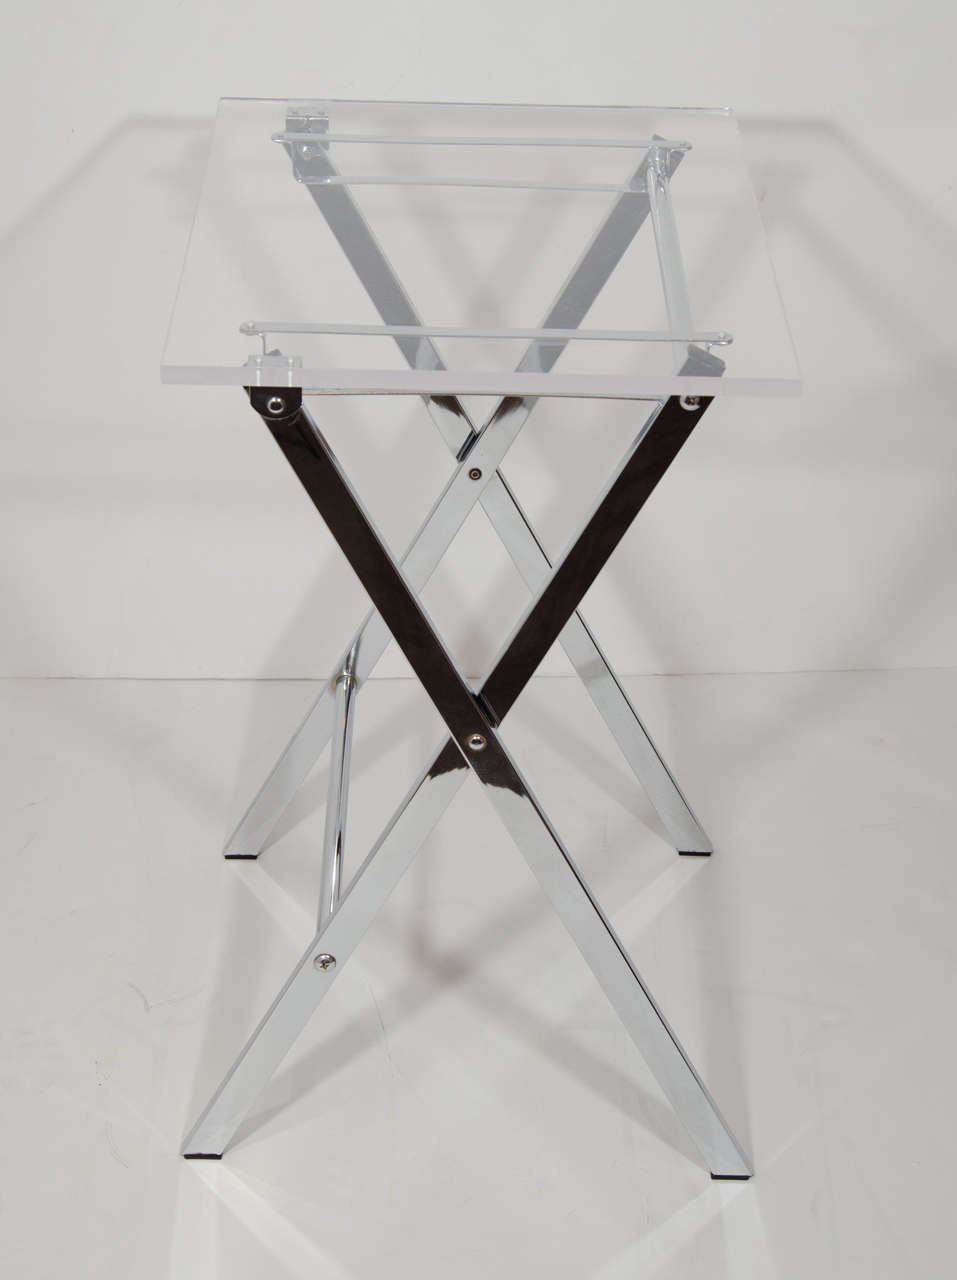 Pair of vintage folding tray tables with modernist design. The tables have 